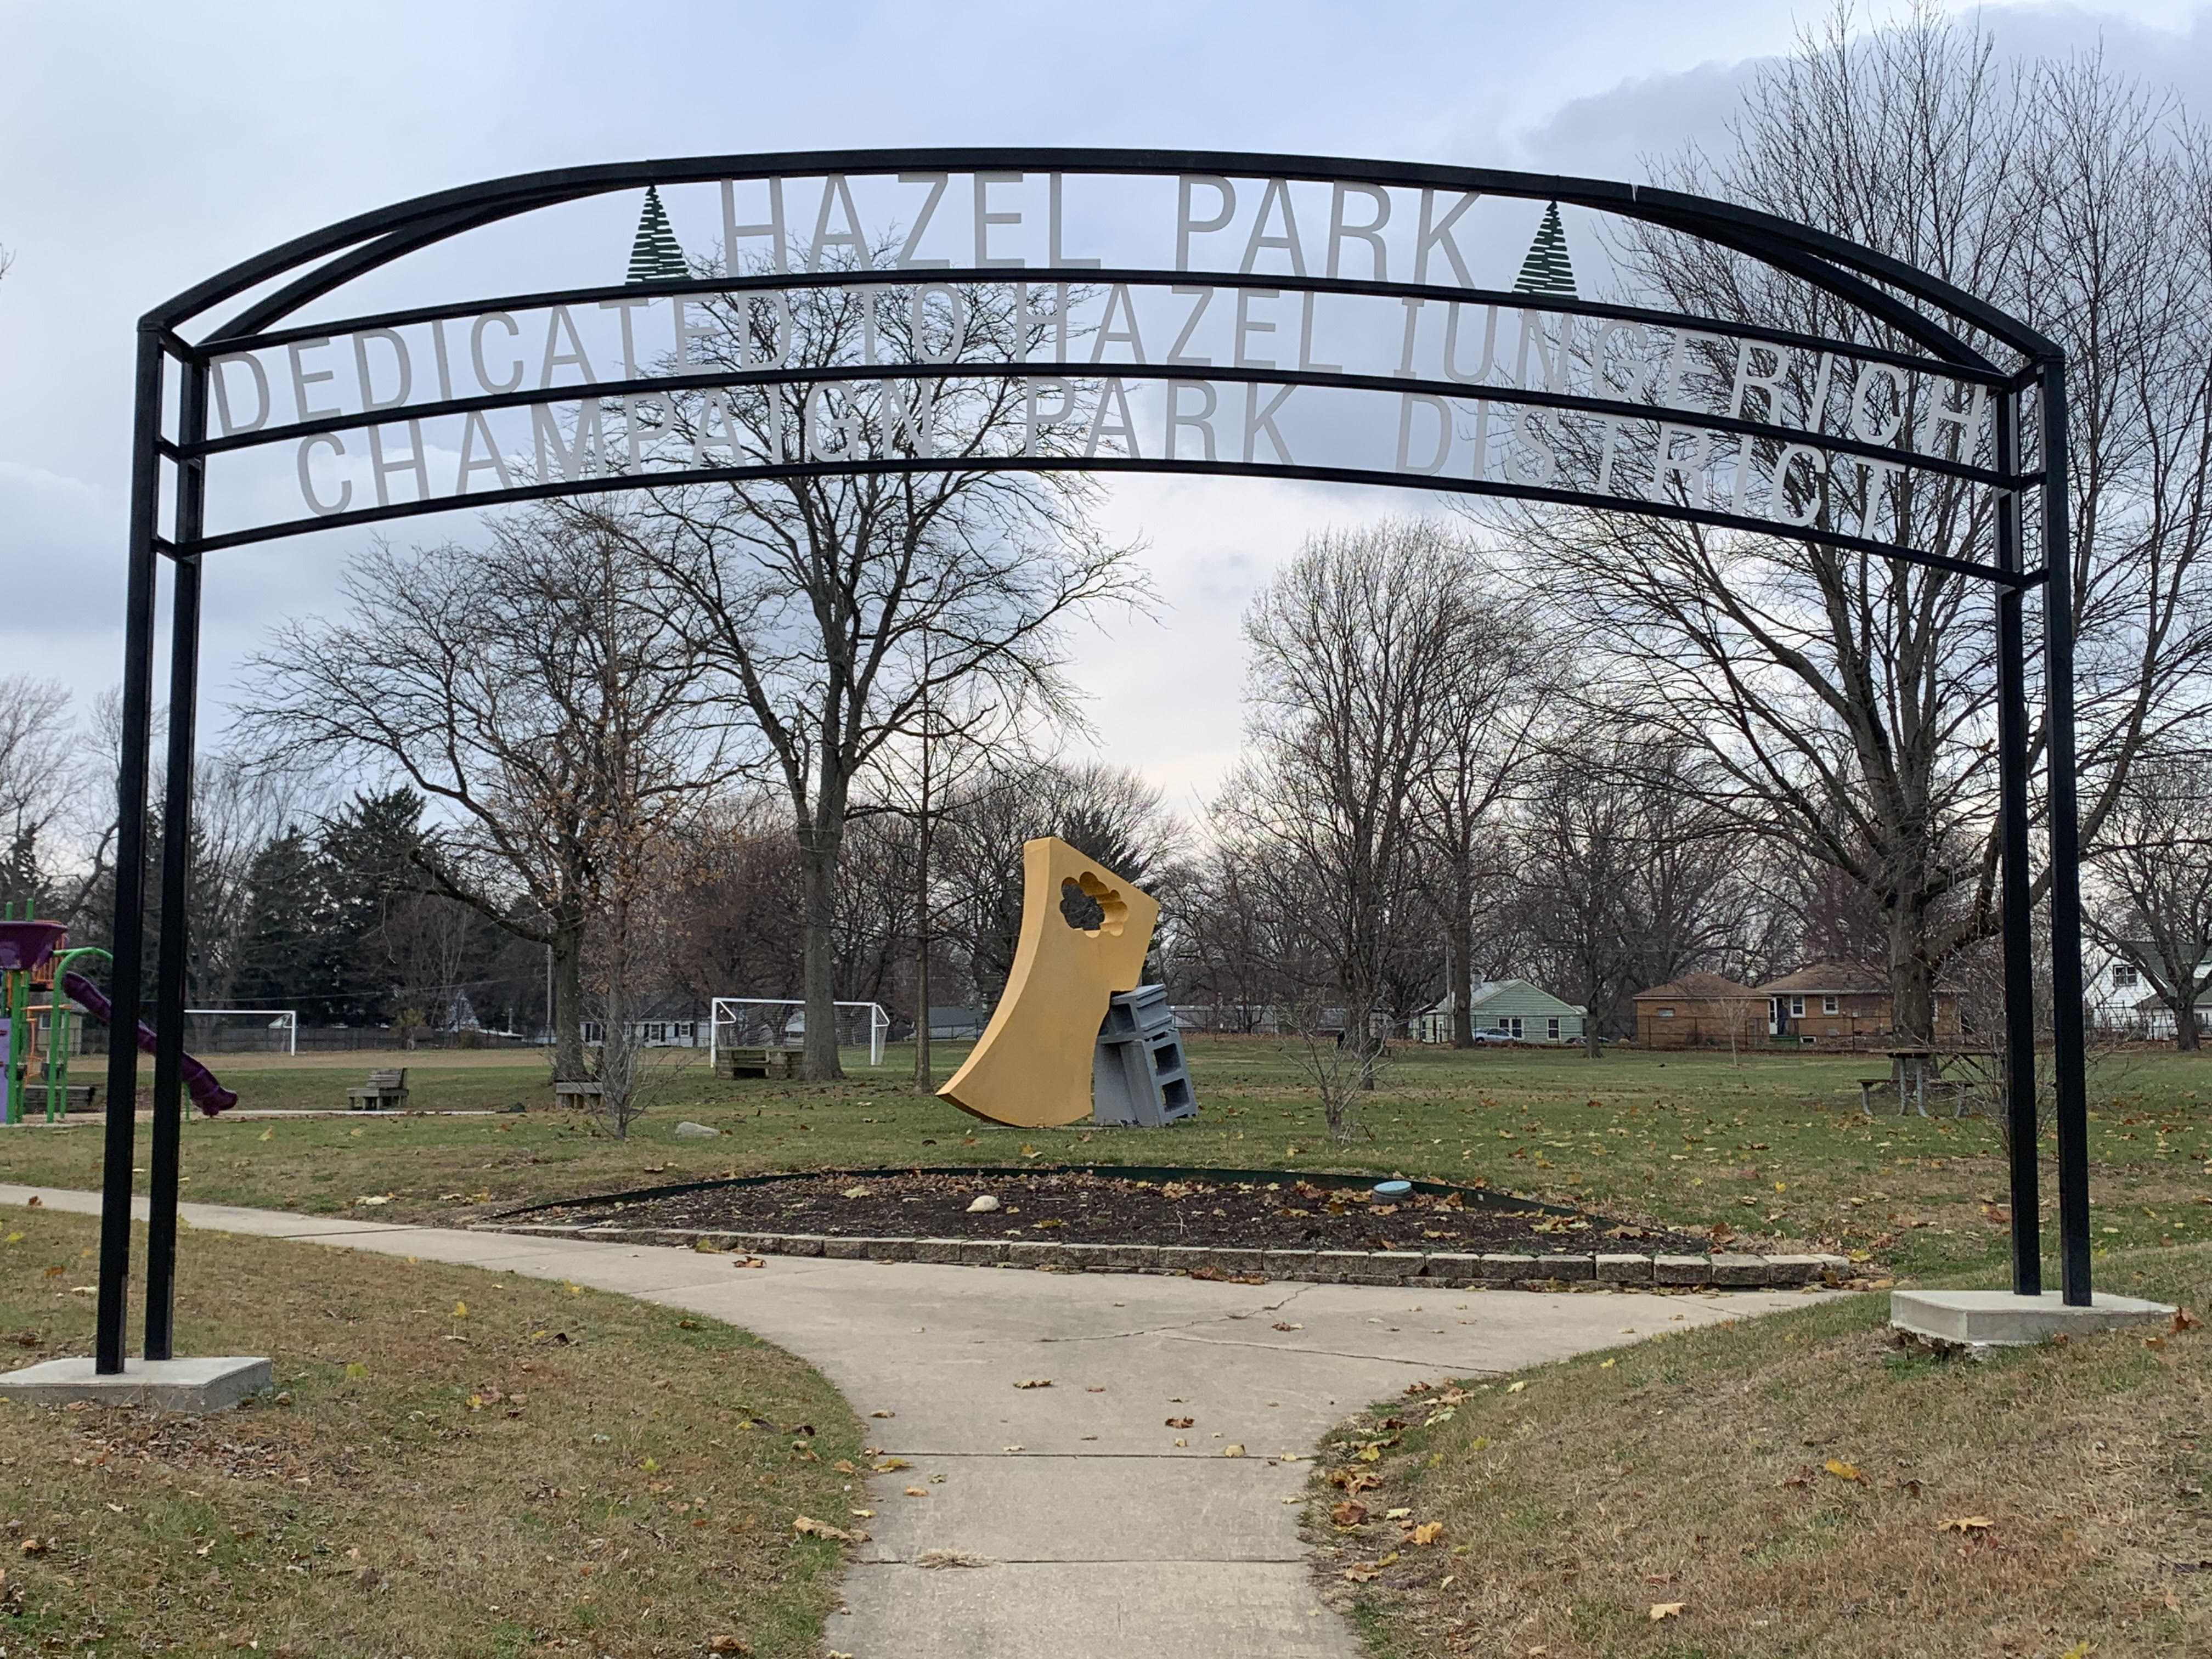 Year of the Park, A to Z: Hazel Park, Champaign